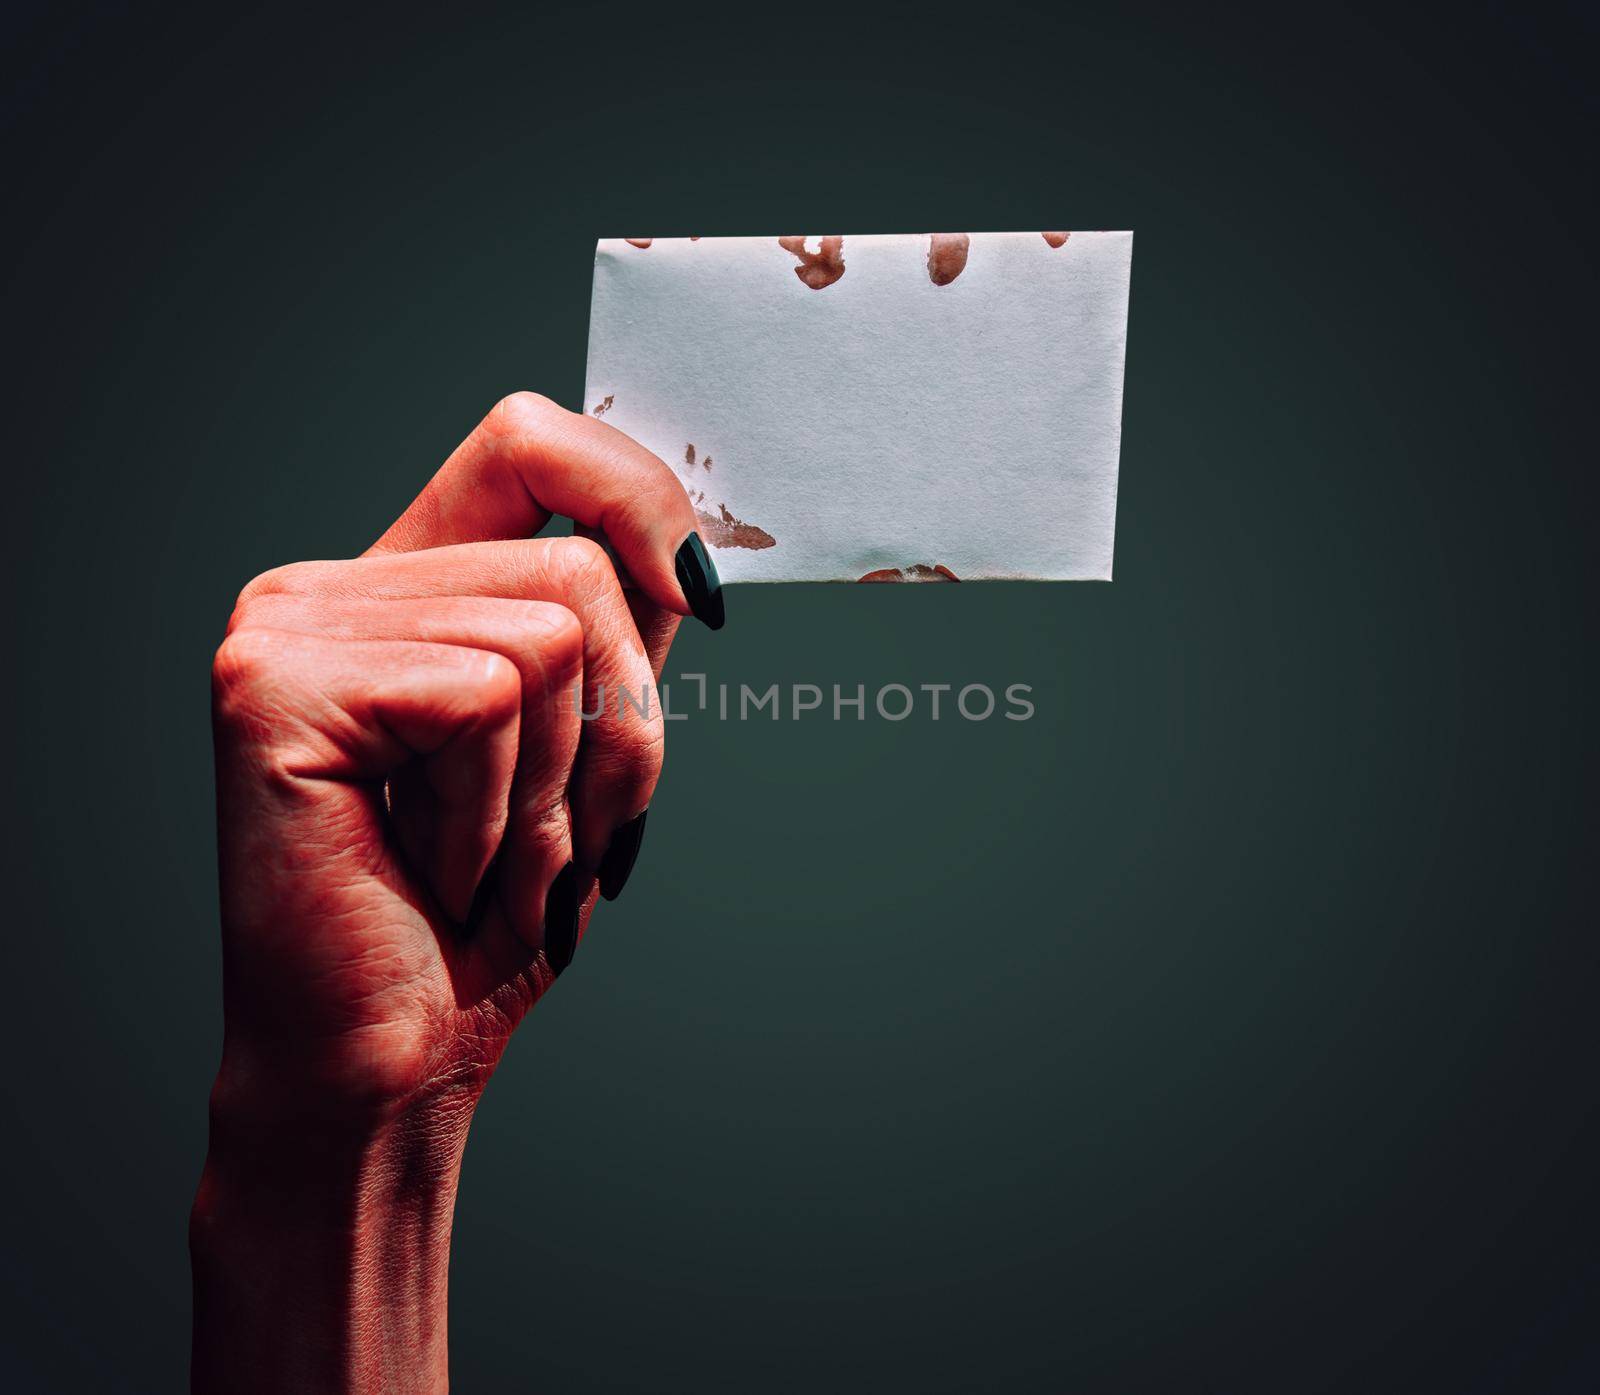 Red demon or devil hand holding empty card on dark background, space for text. Halloween/horror theme